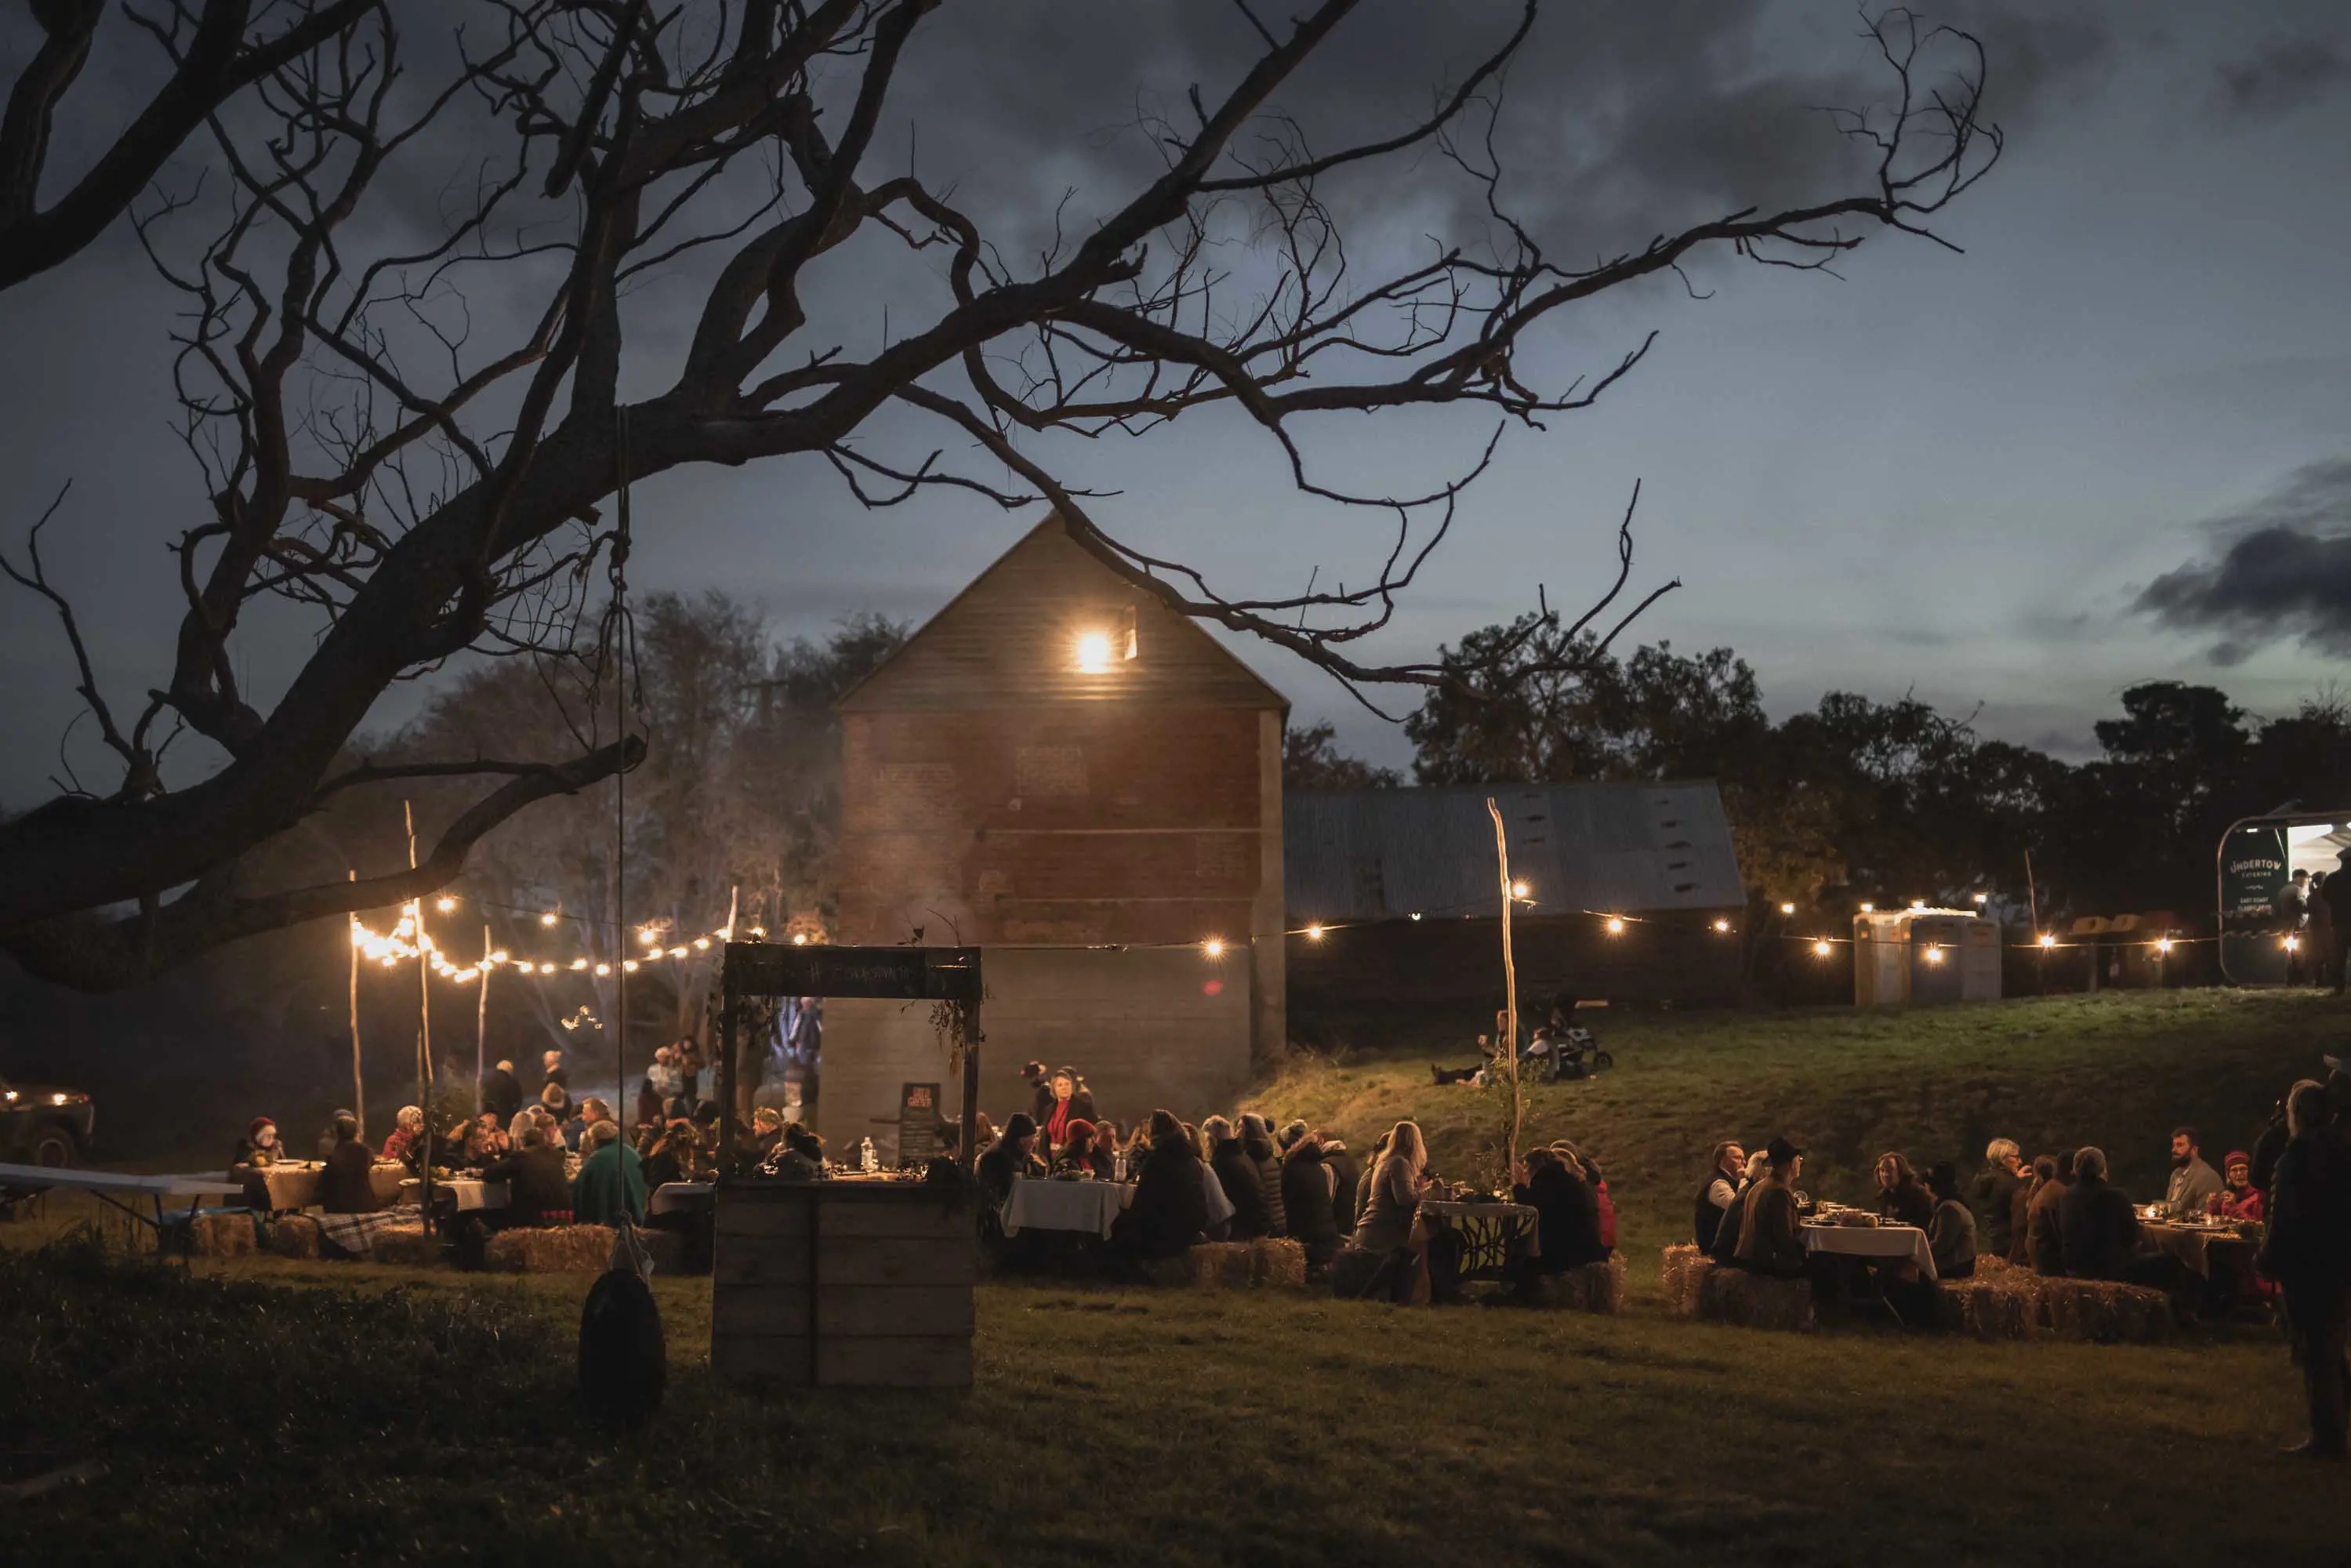 Groups of people sit on makeshift seating made from hay bales under fairy lights on grassy slope in front of an old brick building at night. 